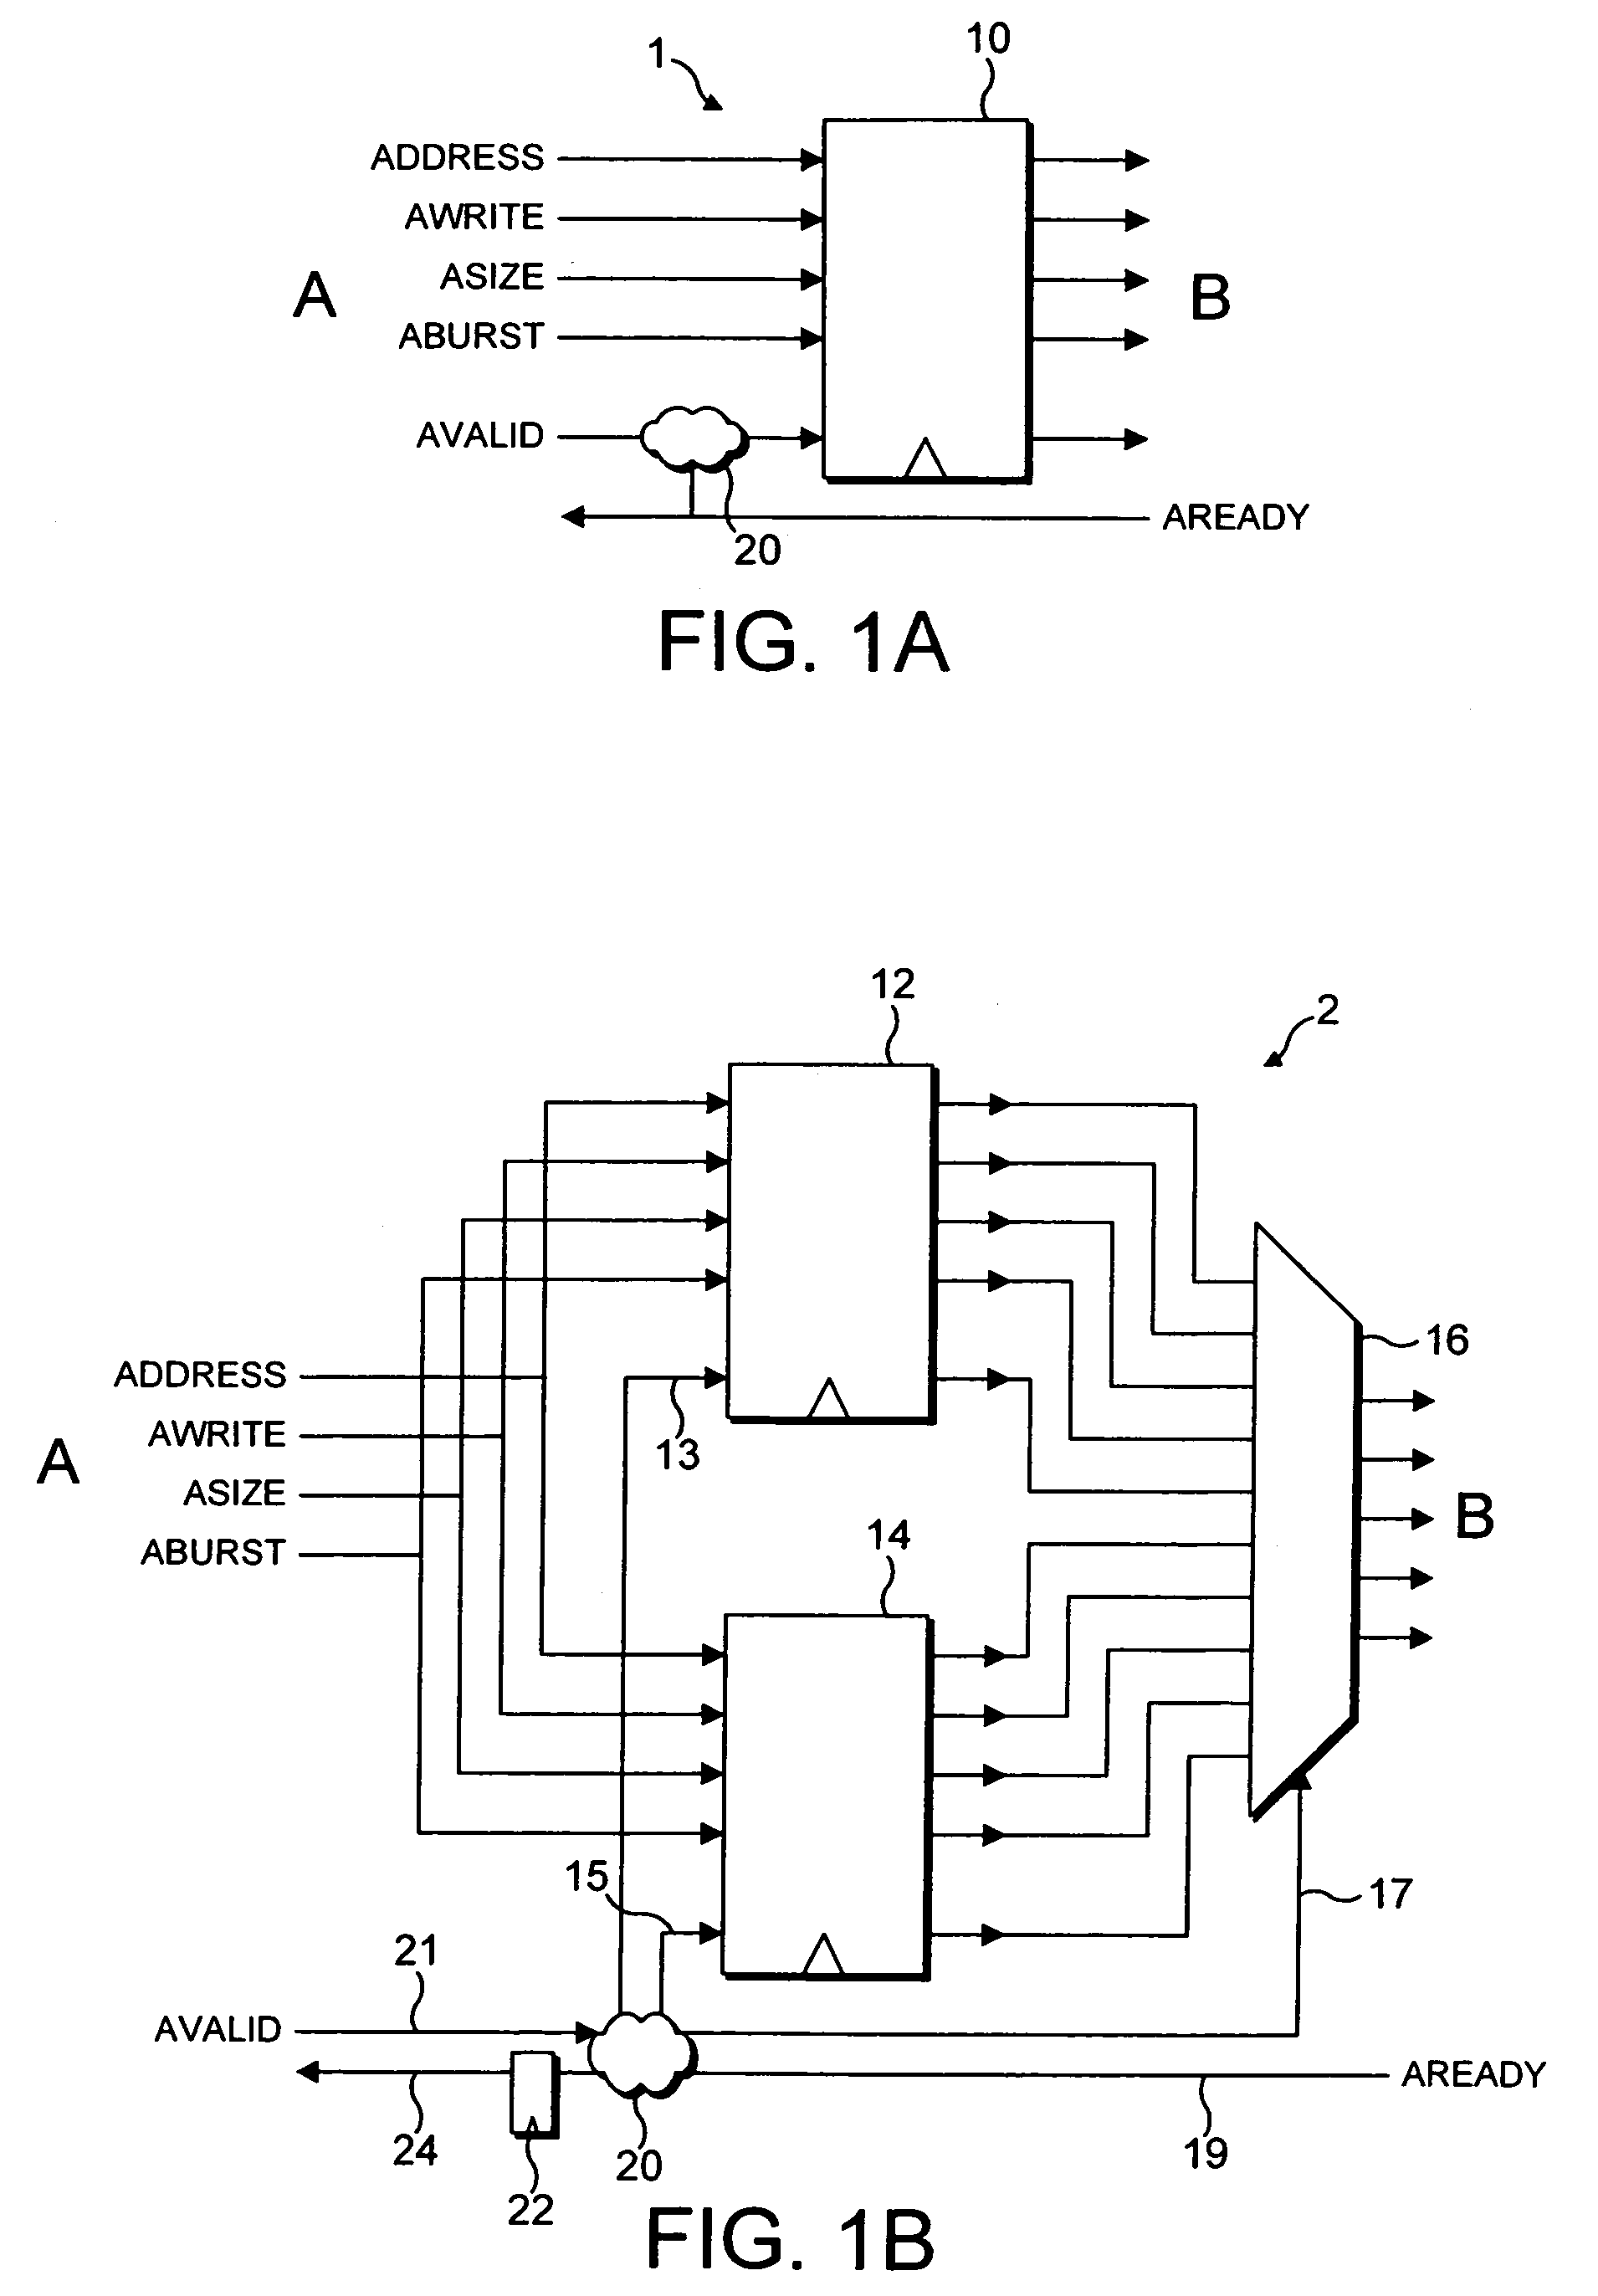 Flexibility of use of a data processing apparatus